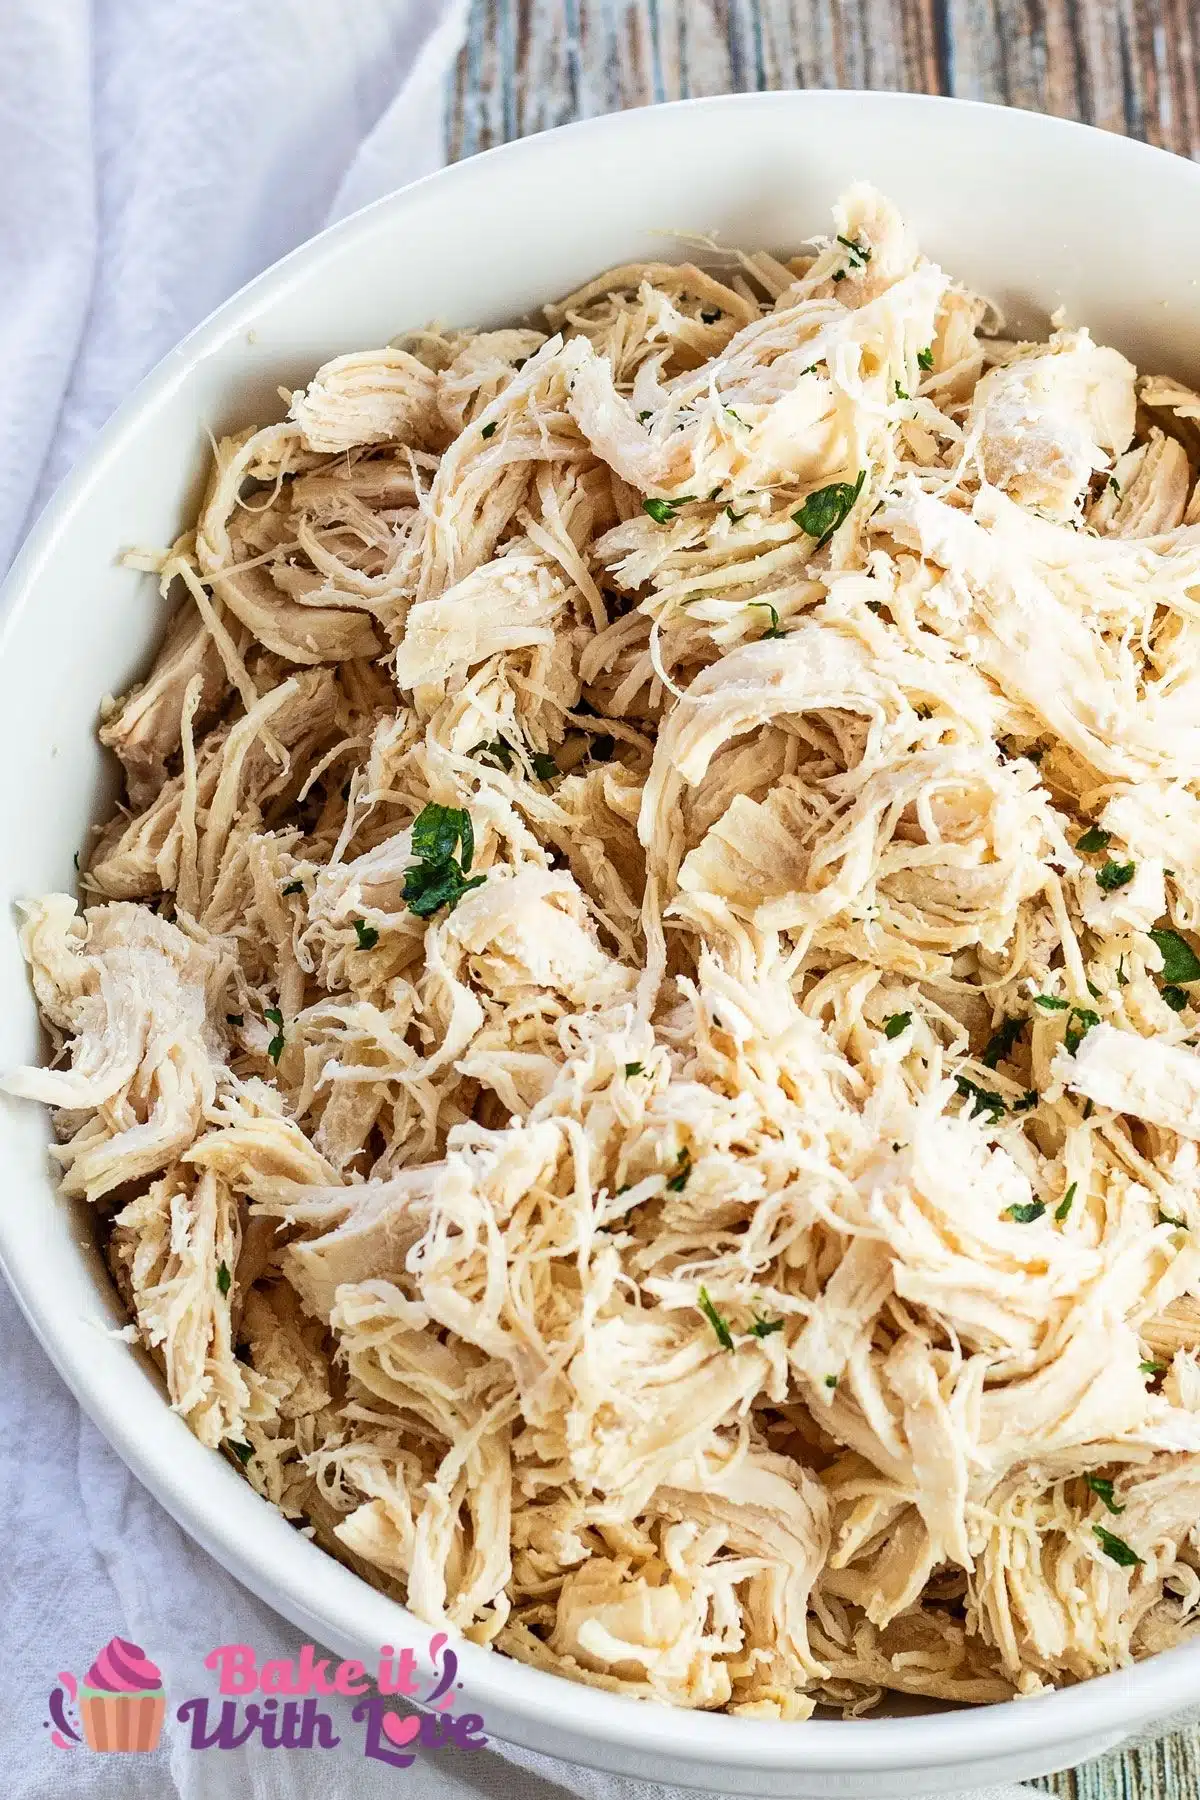 Tall overhead image of the best Instant Pot shredded chicken ready for making tasty dinners.